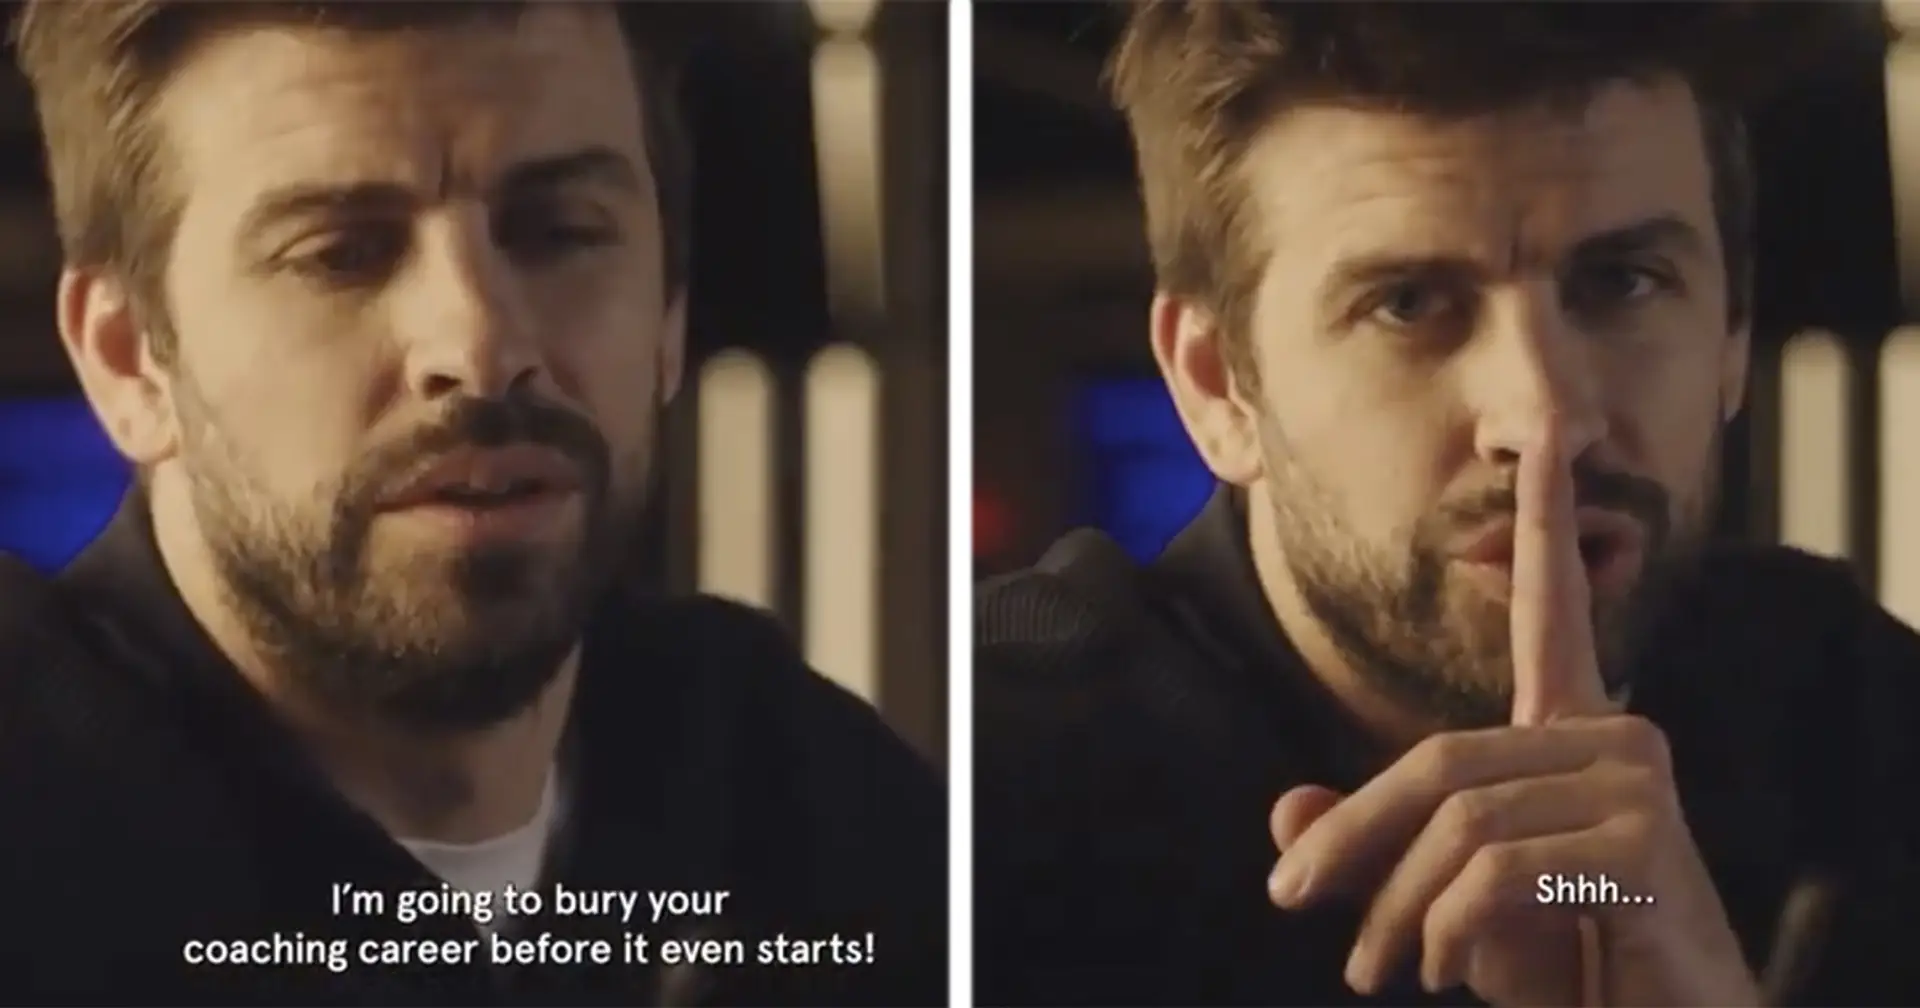 Gerard Pique seems to have fooled fans as he explains football comeback announcement